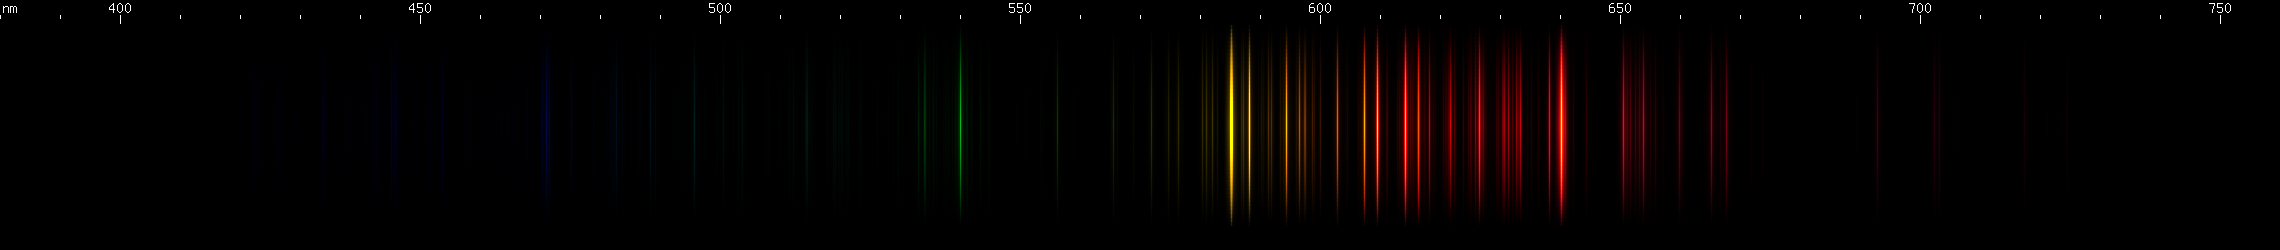 Spectral lines of Neon.